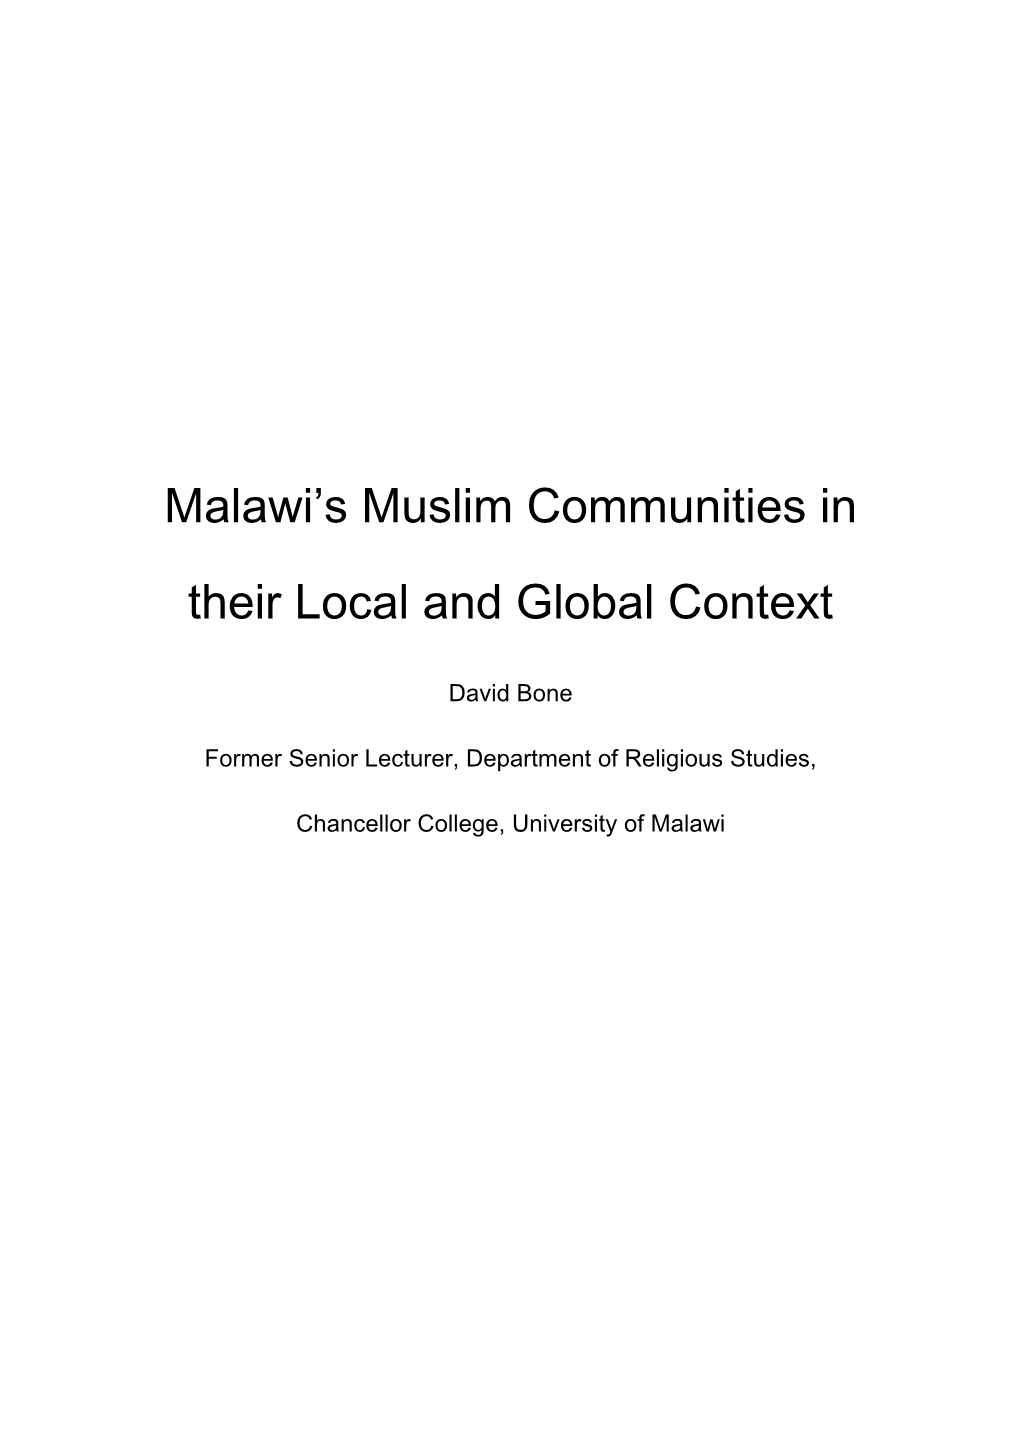 Malawi's Muslim Communities in Their Local and Global Context